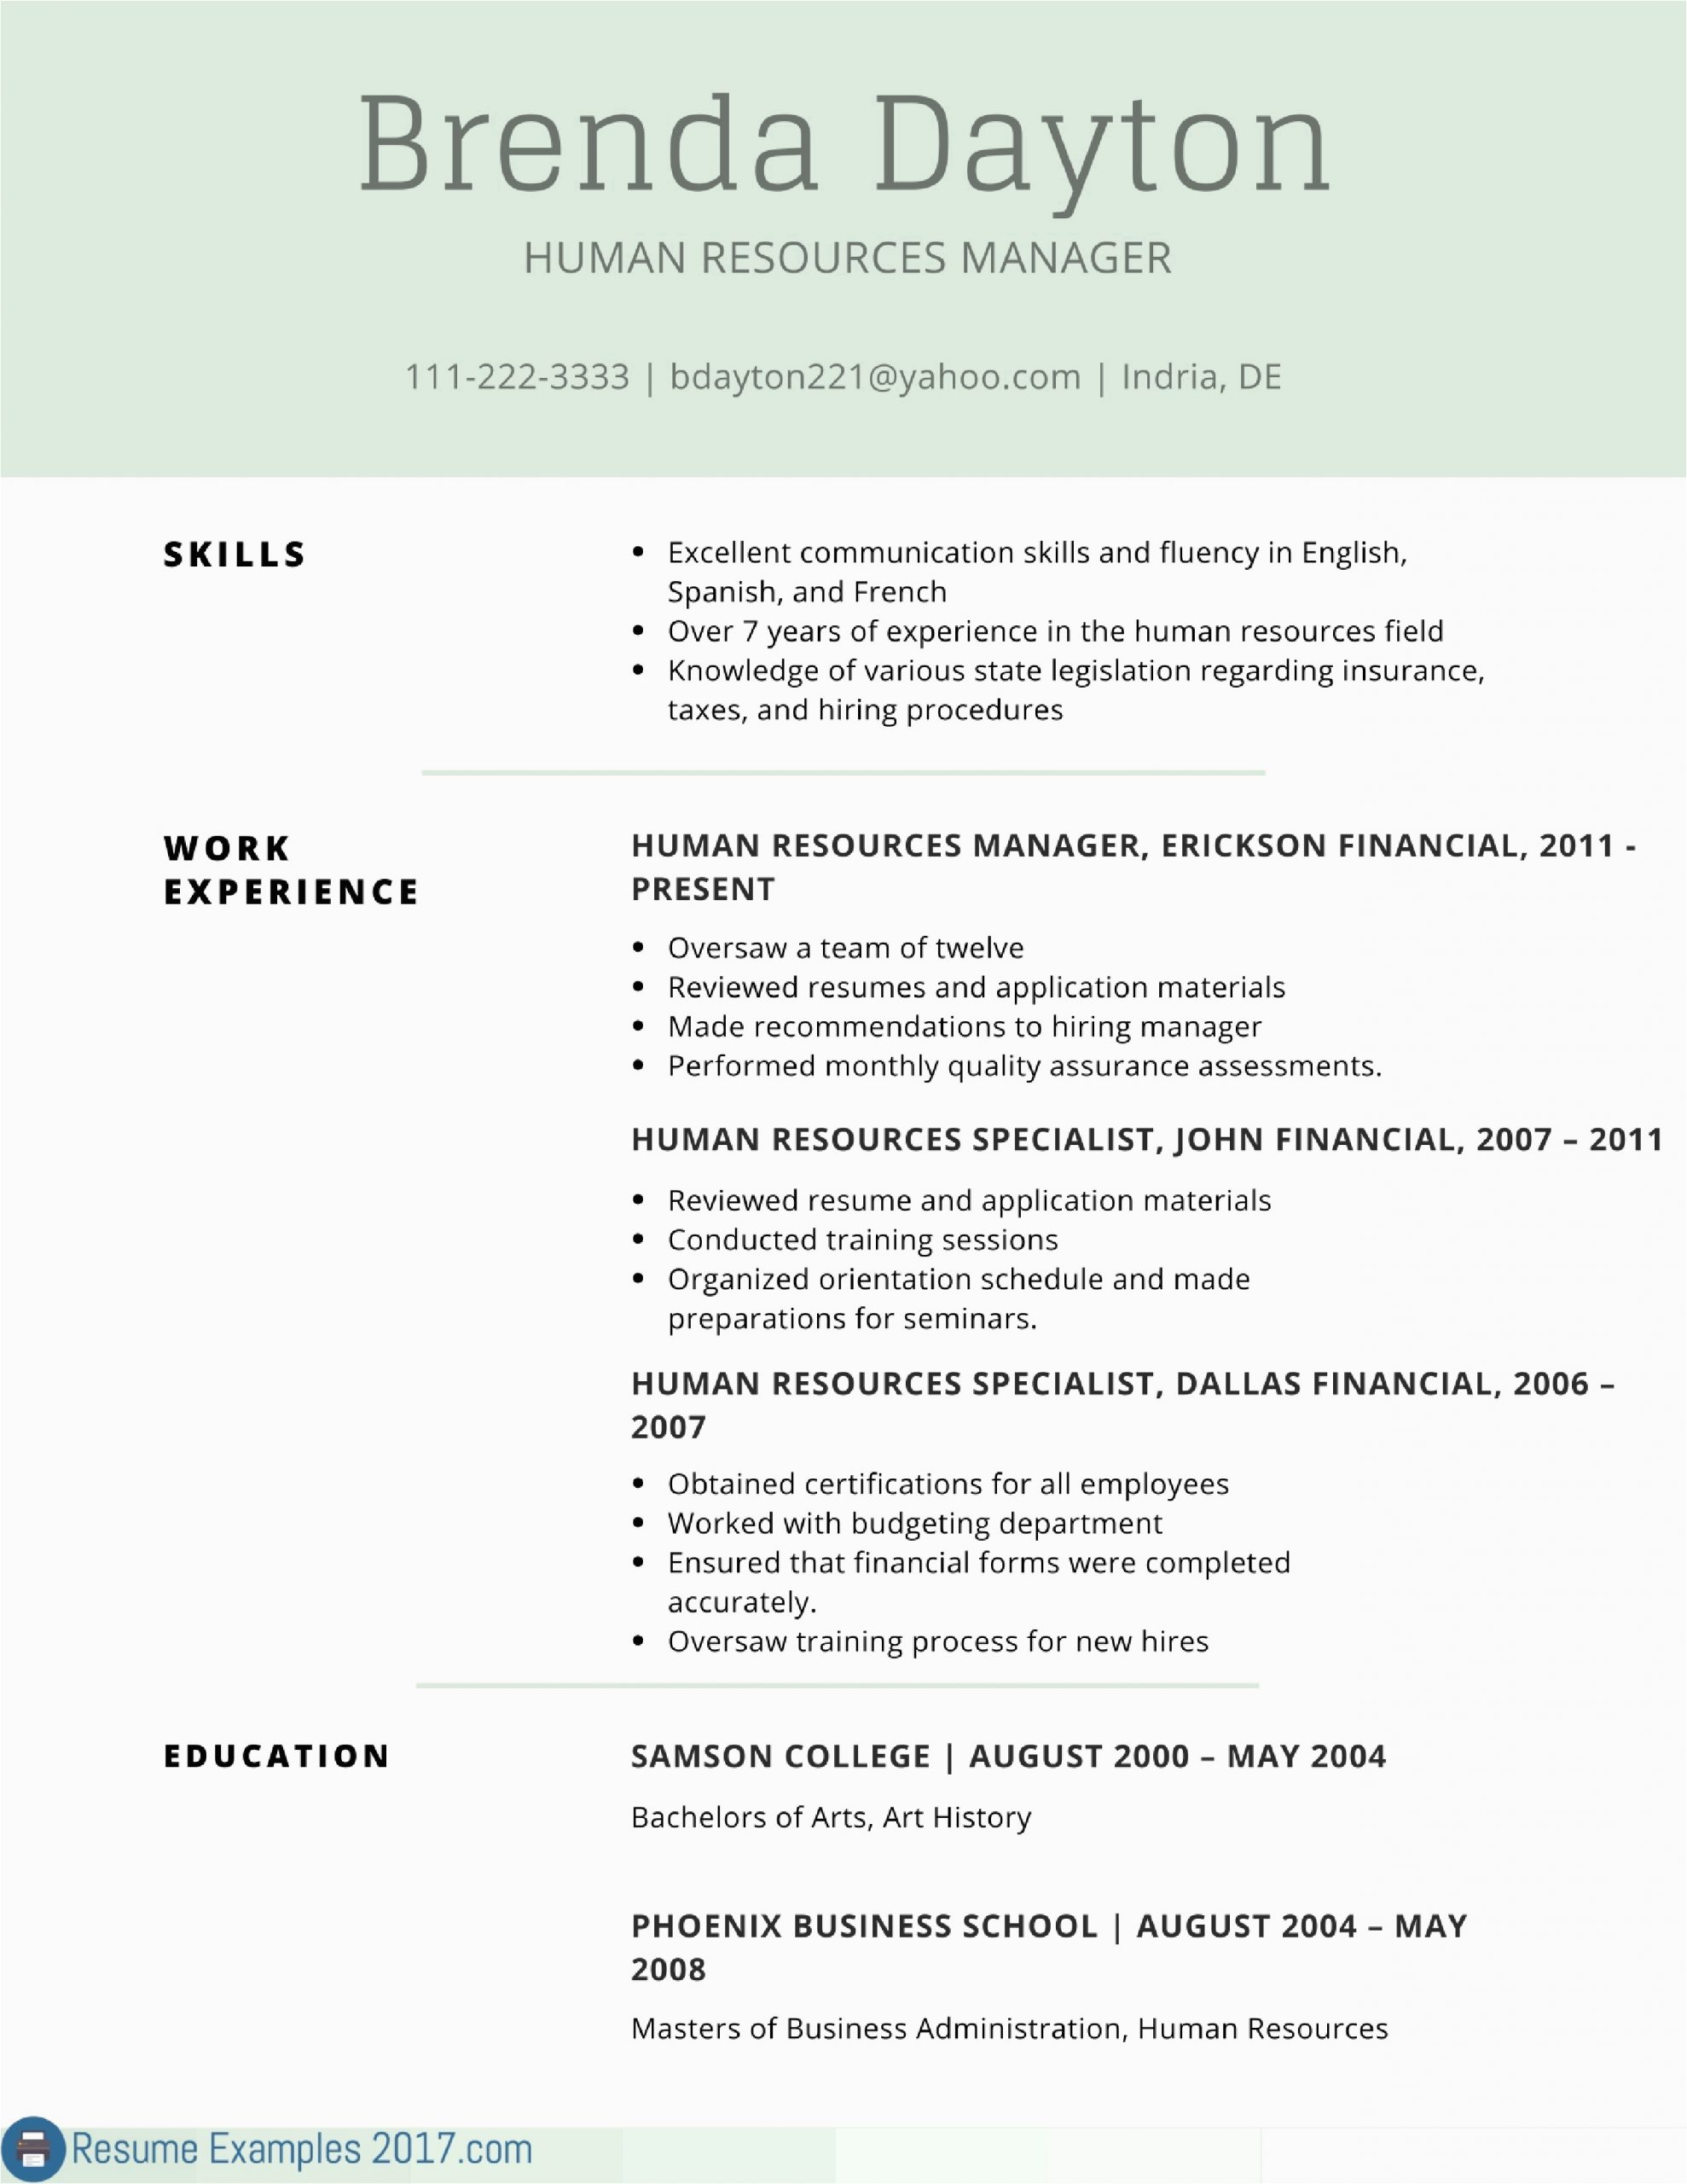 resume skills and interests examples